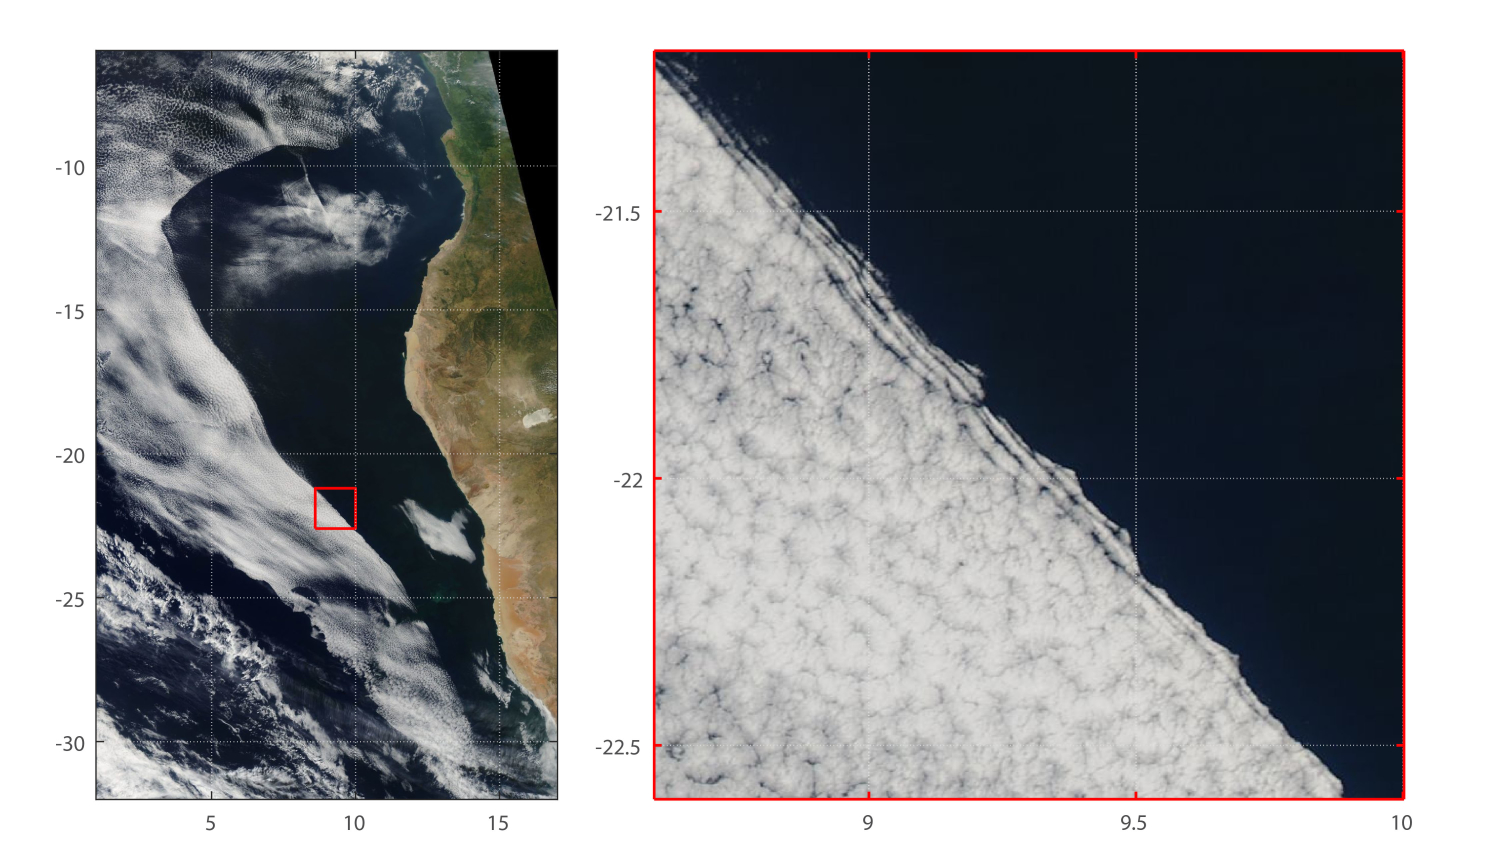 cloudclearing - Center for Geospatial Analytics at NC State University